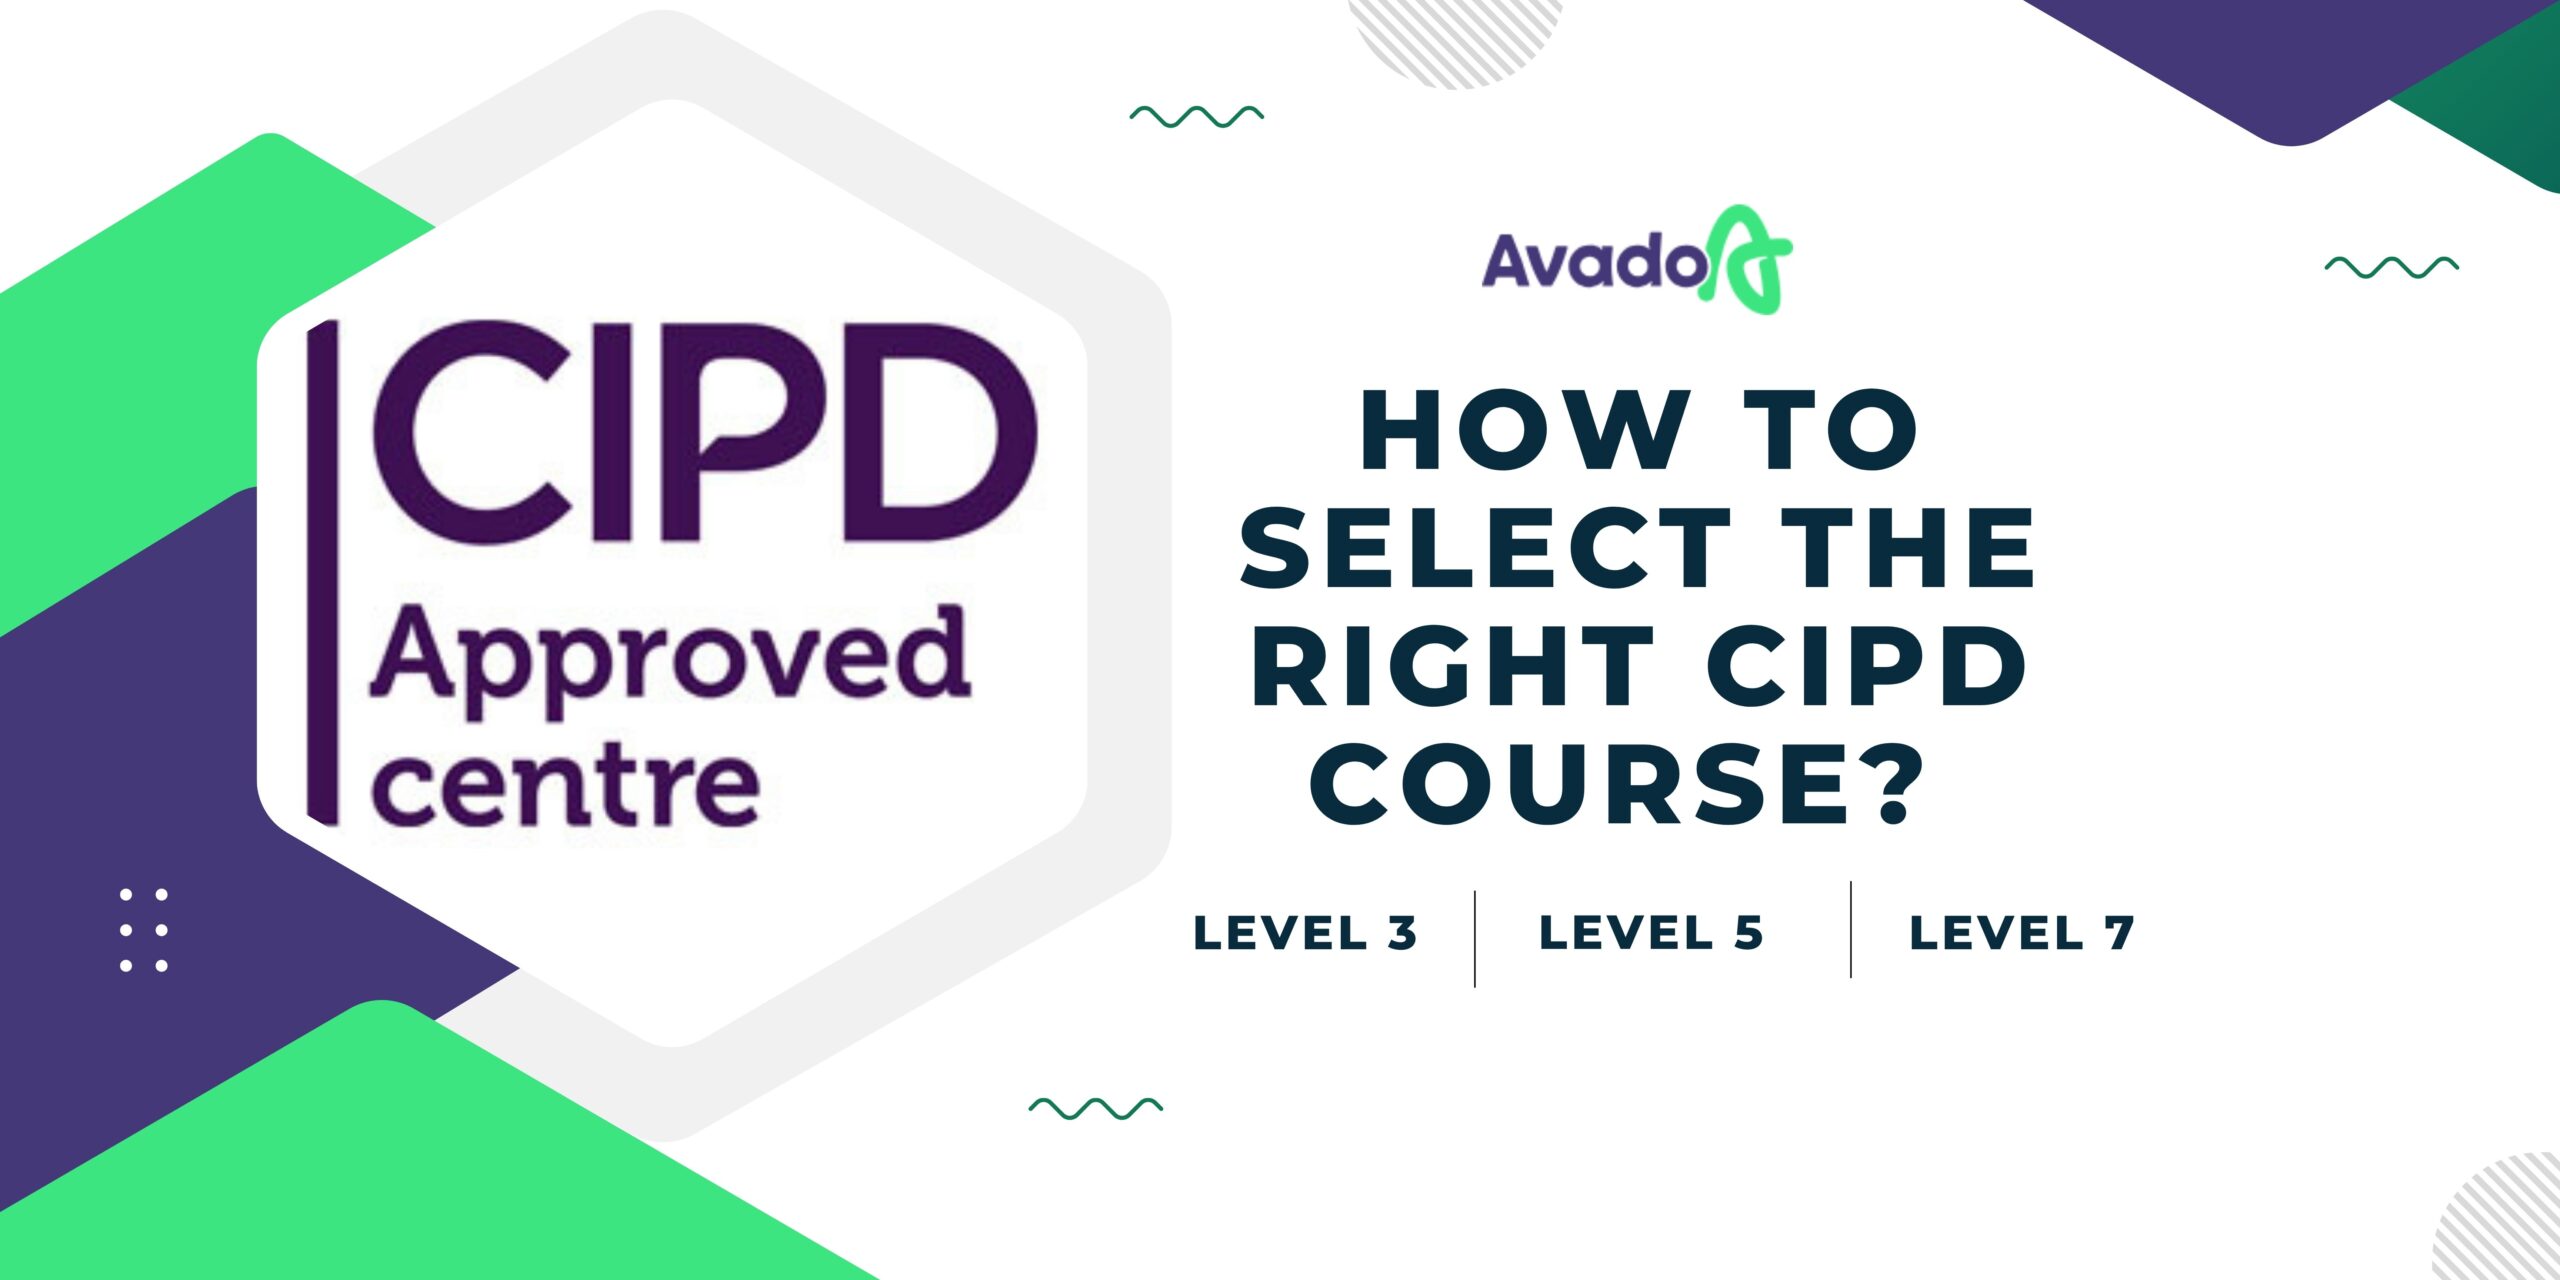 How to Select the Right CIPD Course?